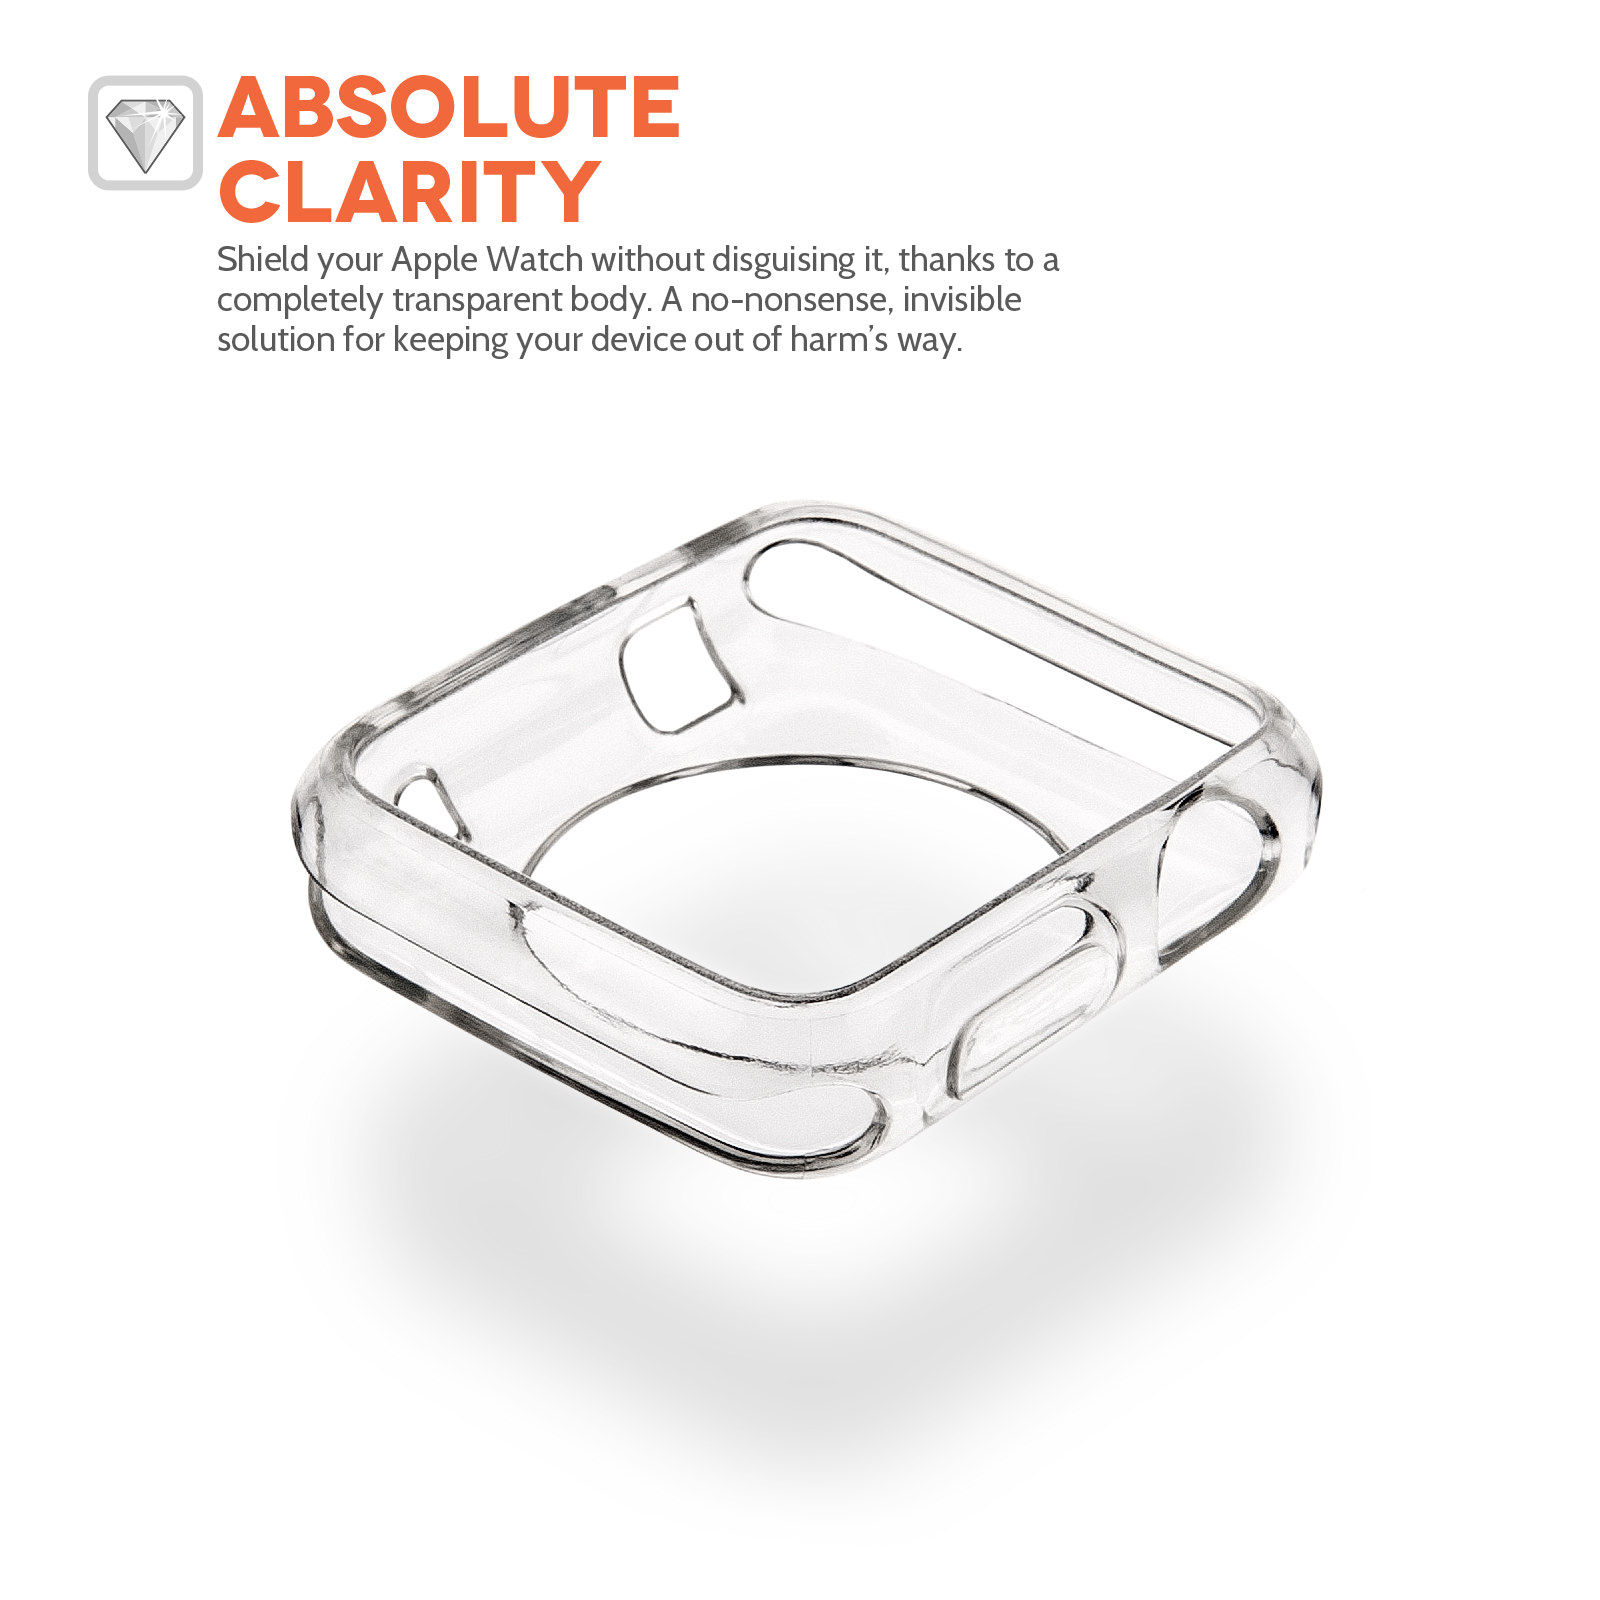 Yousave Accessories Apple Watch 38mm Clear Gel Cover